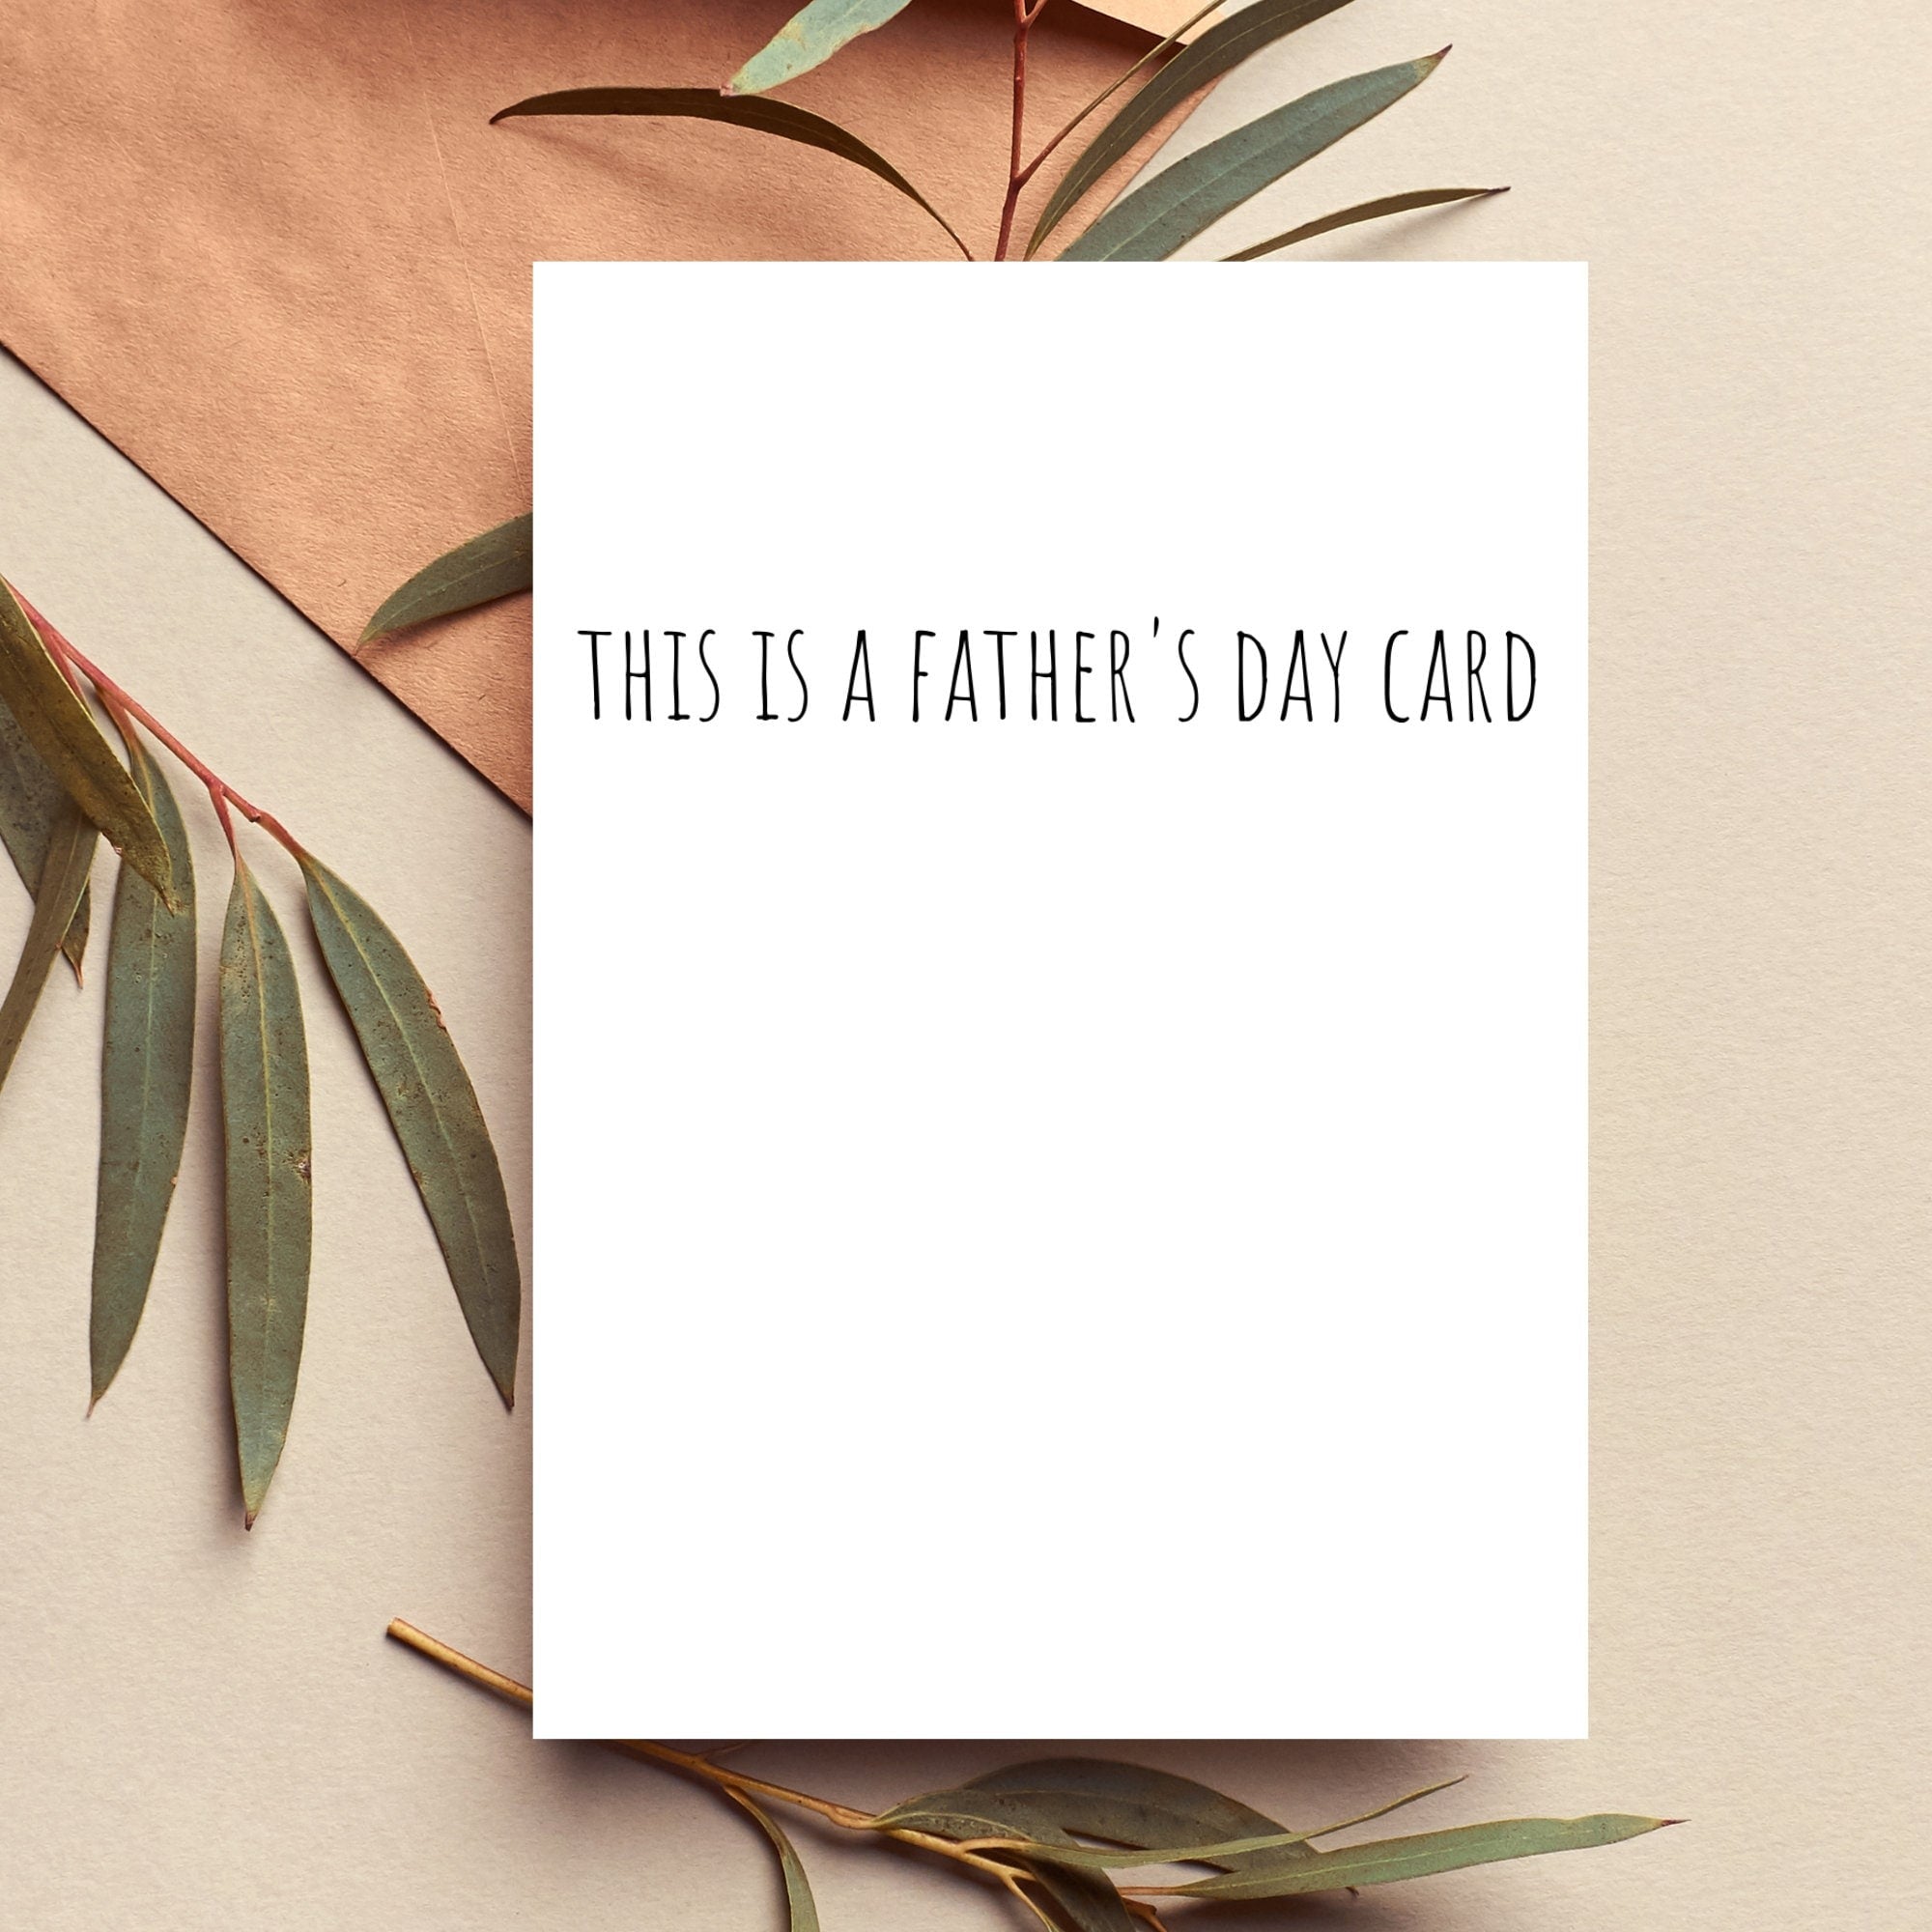 This is a Father's Day Card